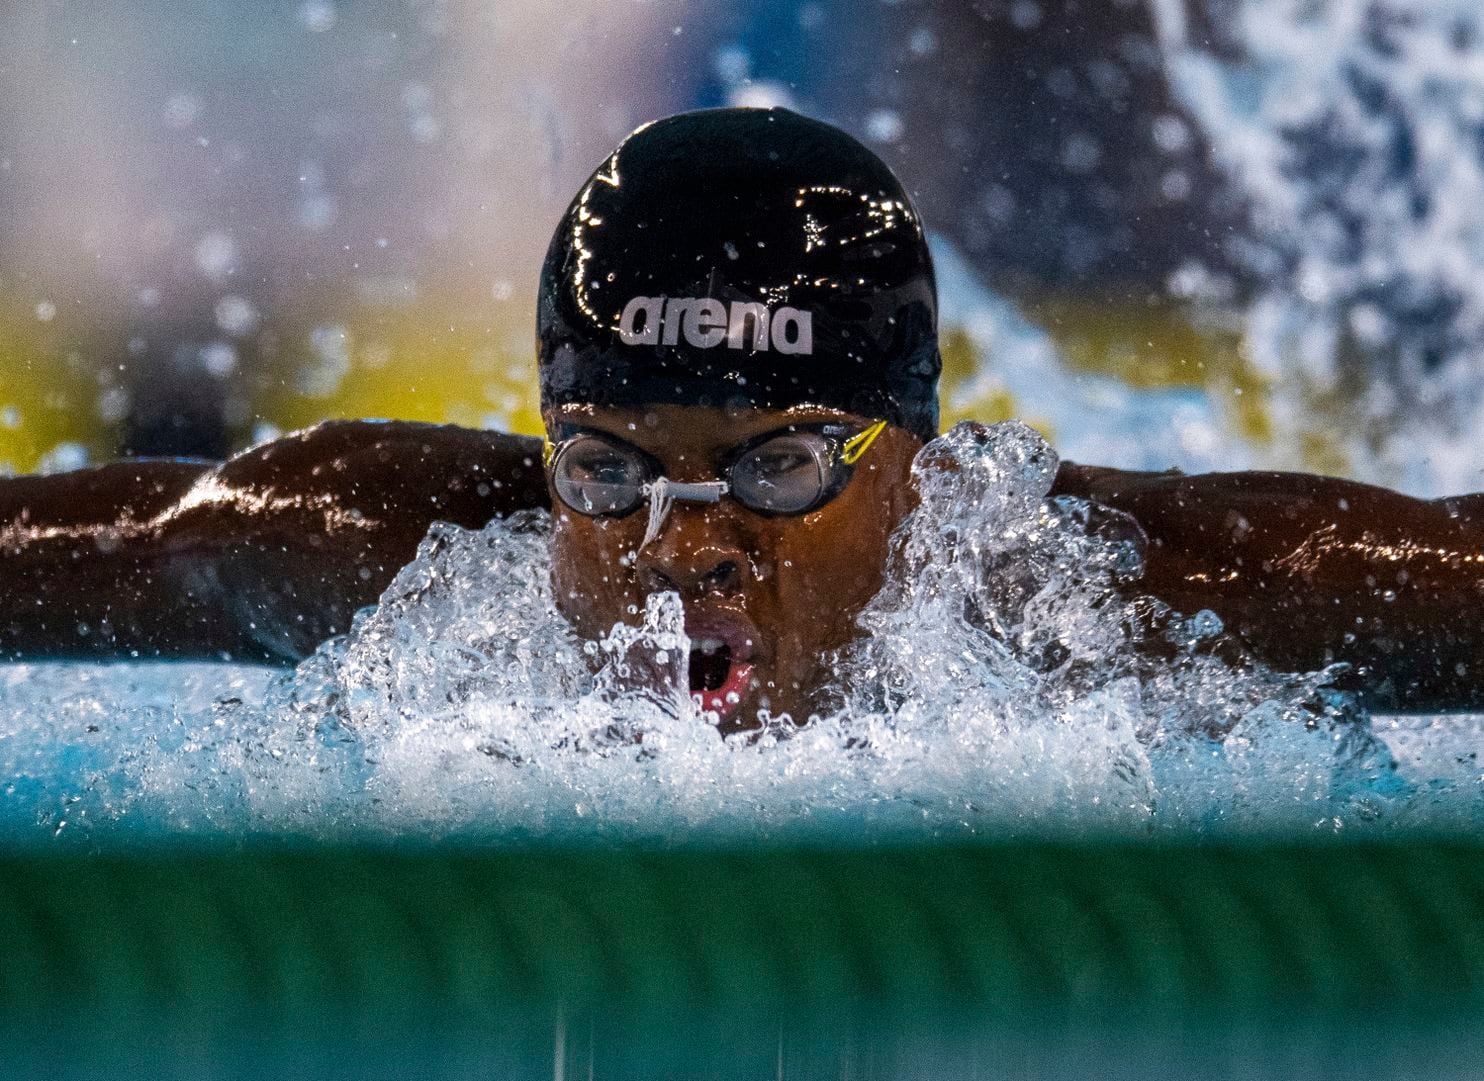 Mali swimmer Ousmane Toure competes in the Men’s 100m Butterfly Heat at the Natatorium during the Youth Olympic Summer Games in Buenos Aires, Argentina, Monday, Oct. 8, 2018. (Joel Marklund/OIS/IOC via AP) (Associated Press)